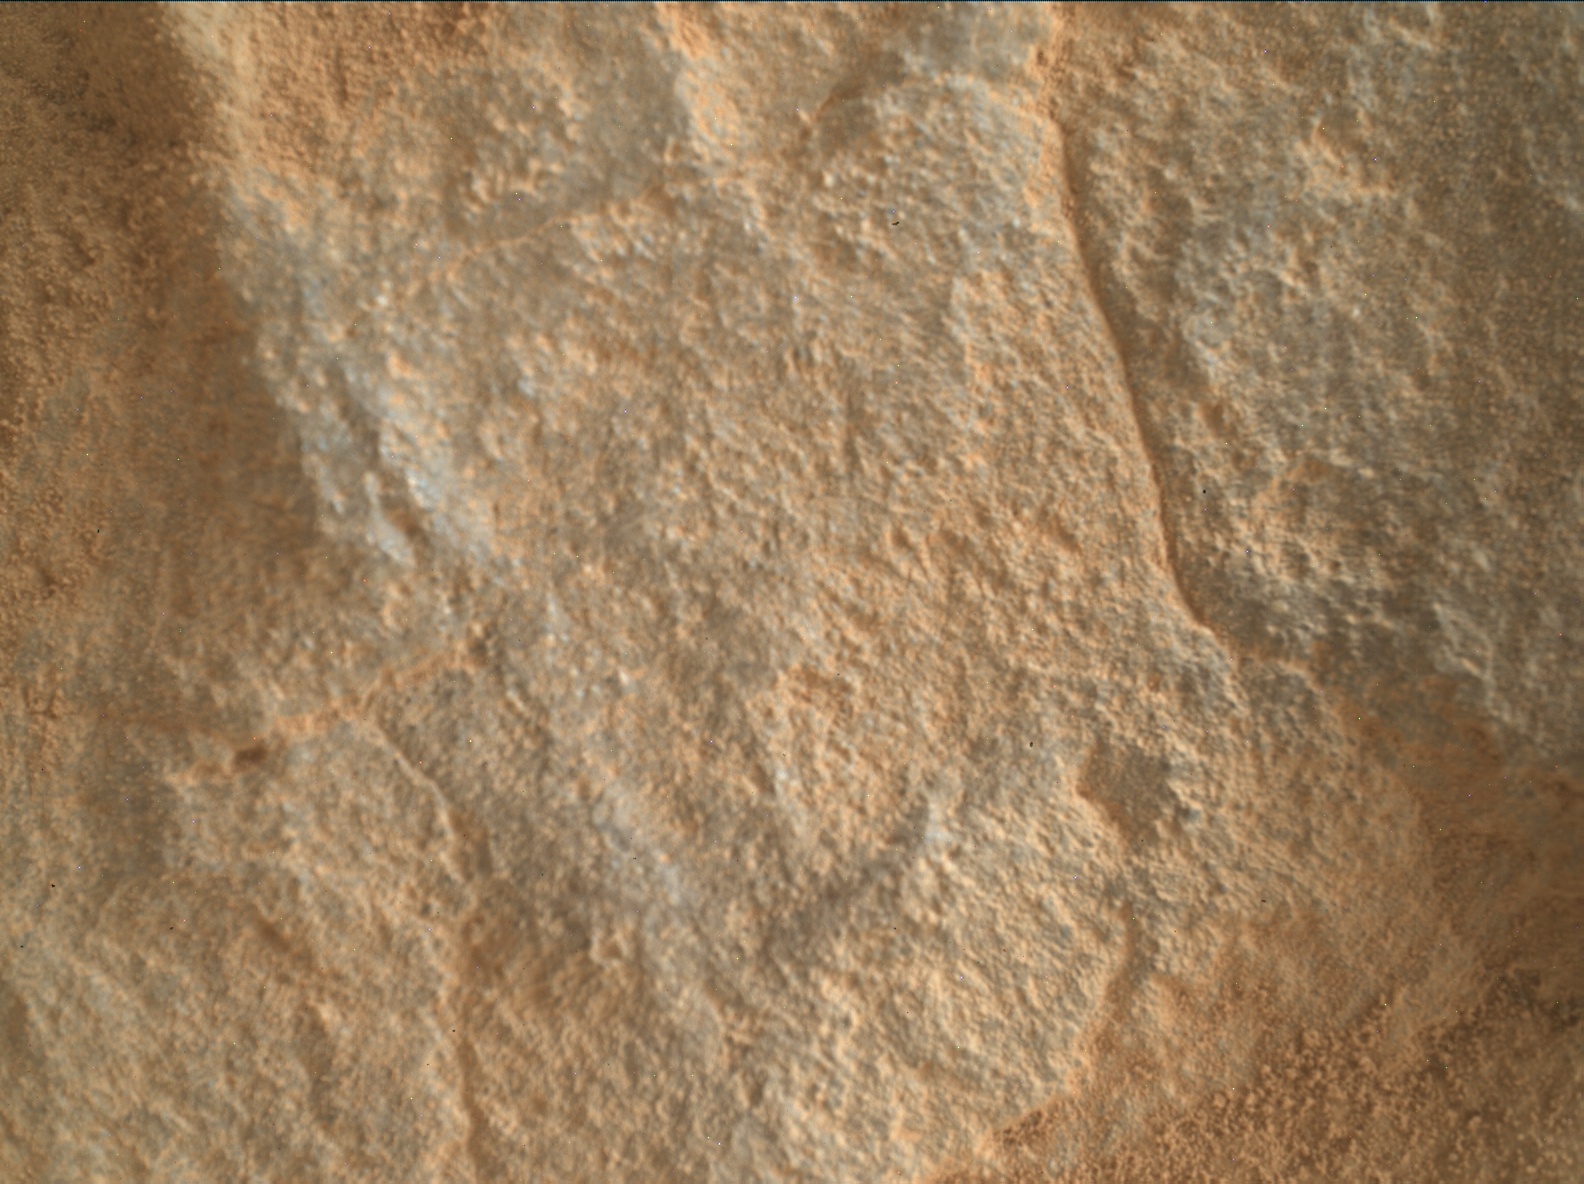 Nasa's Mars rover Curiosity acquired this image using its Mars Hand Lens Imager (MAHLI) on Sol 3409